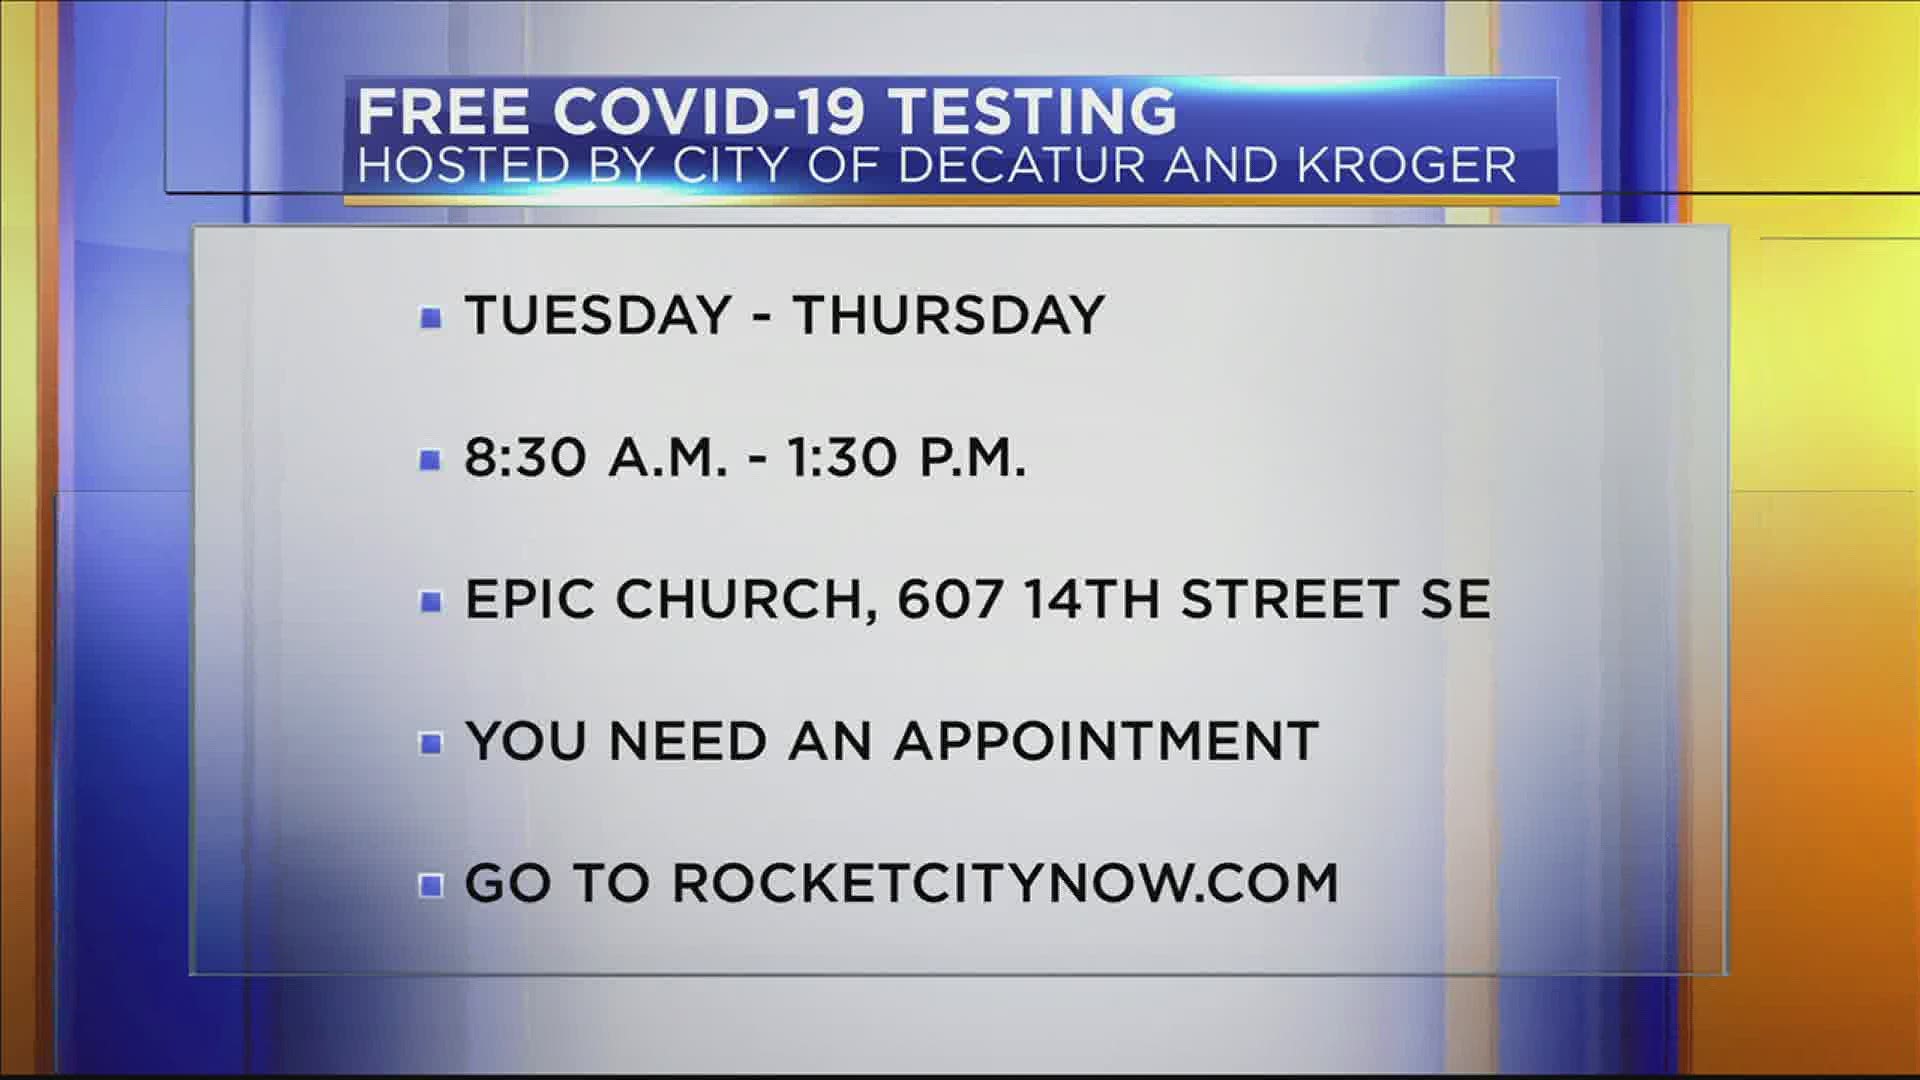 Free testing will be offered Tuesday-Thursday.